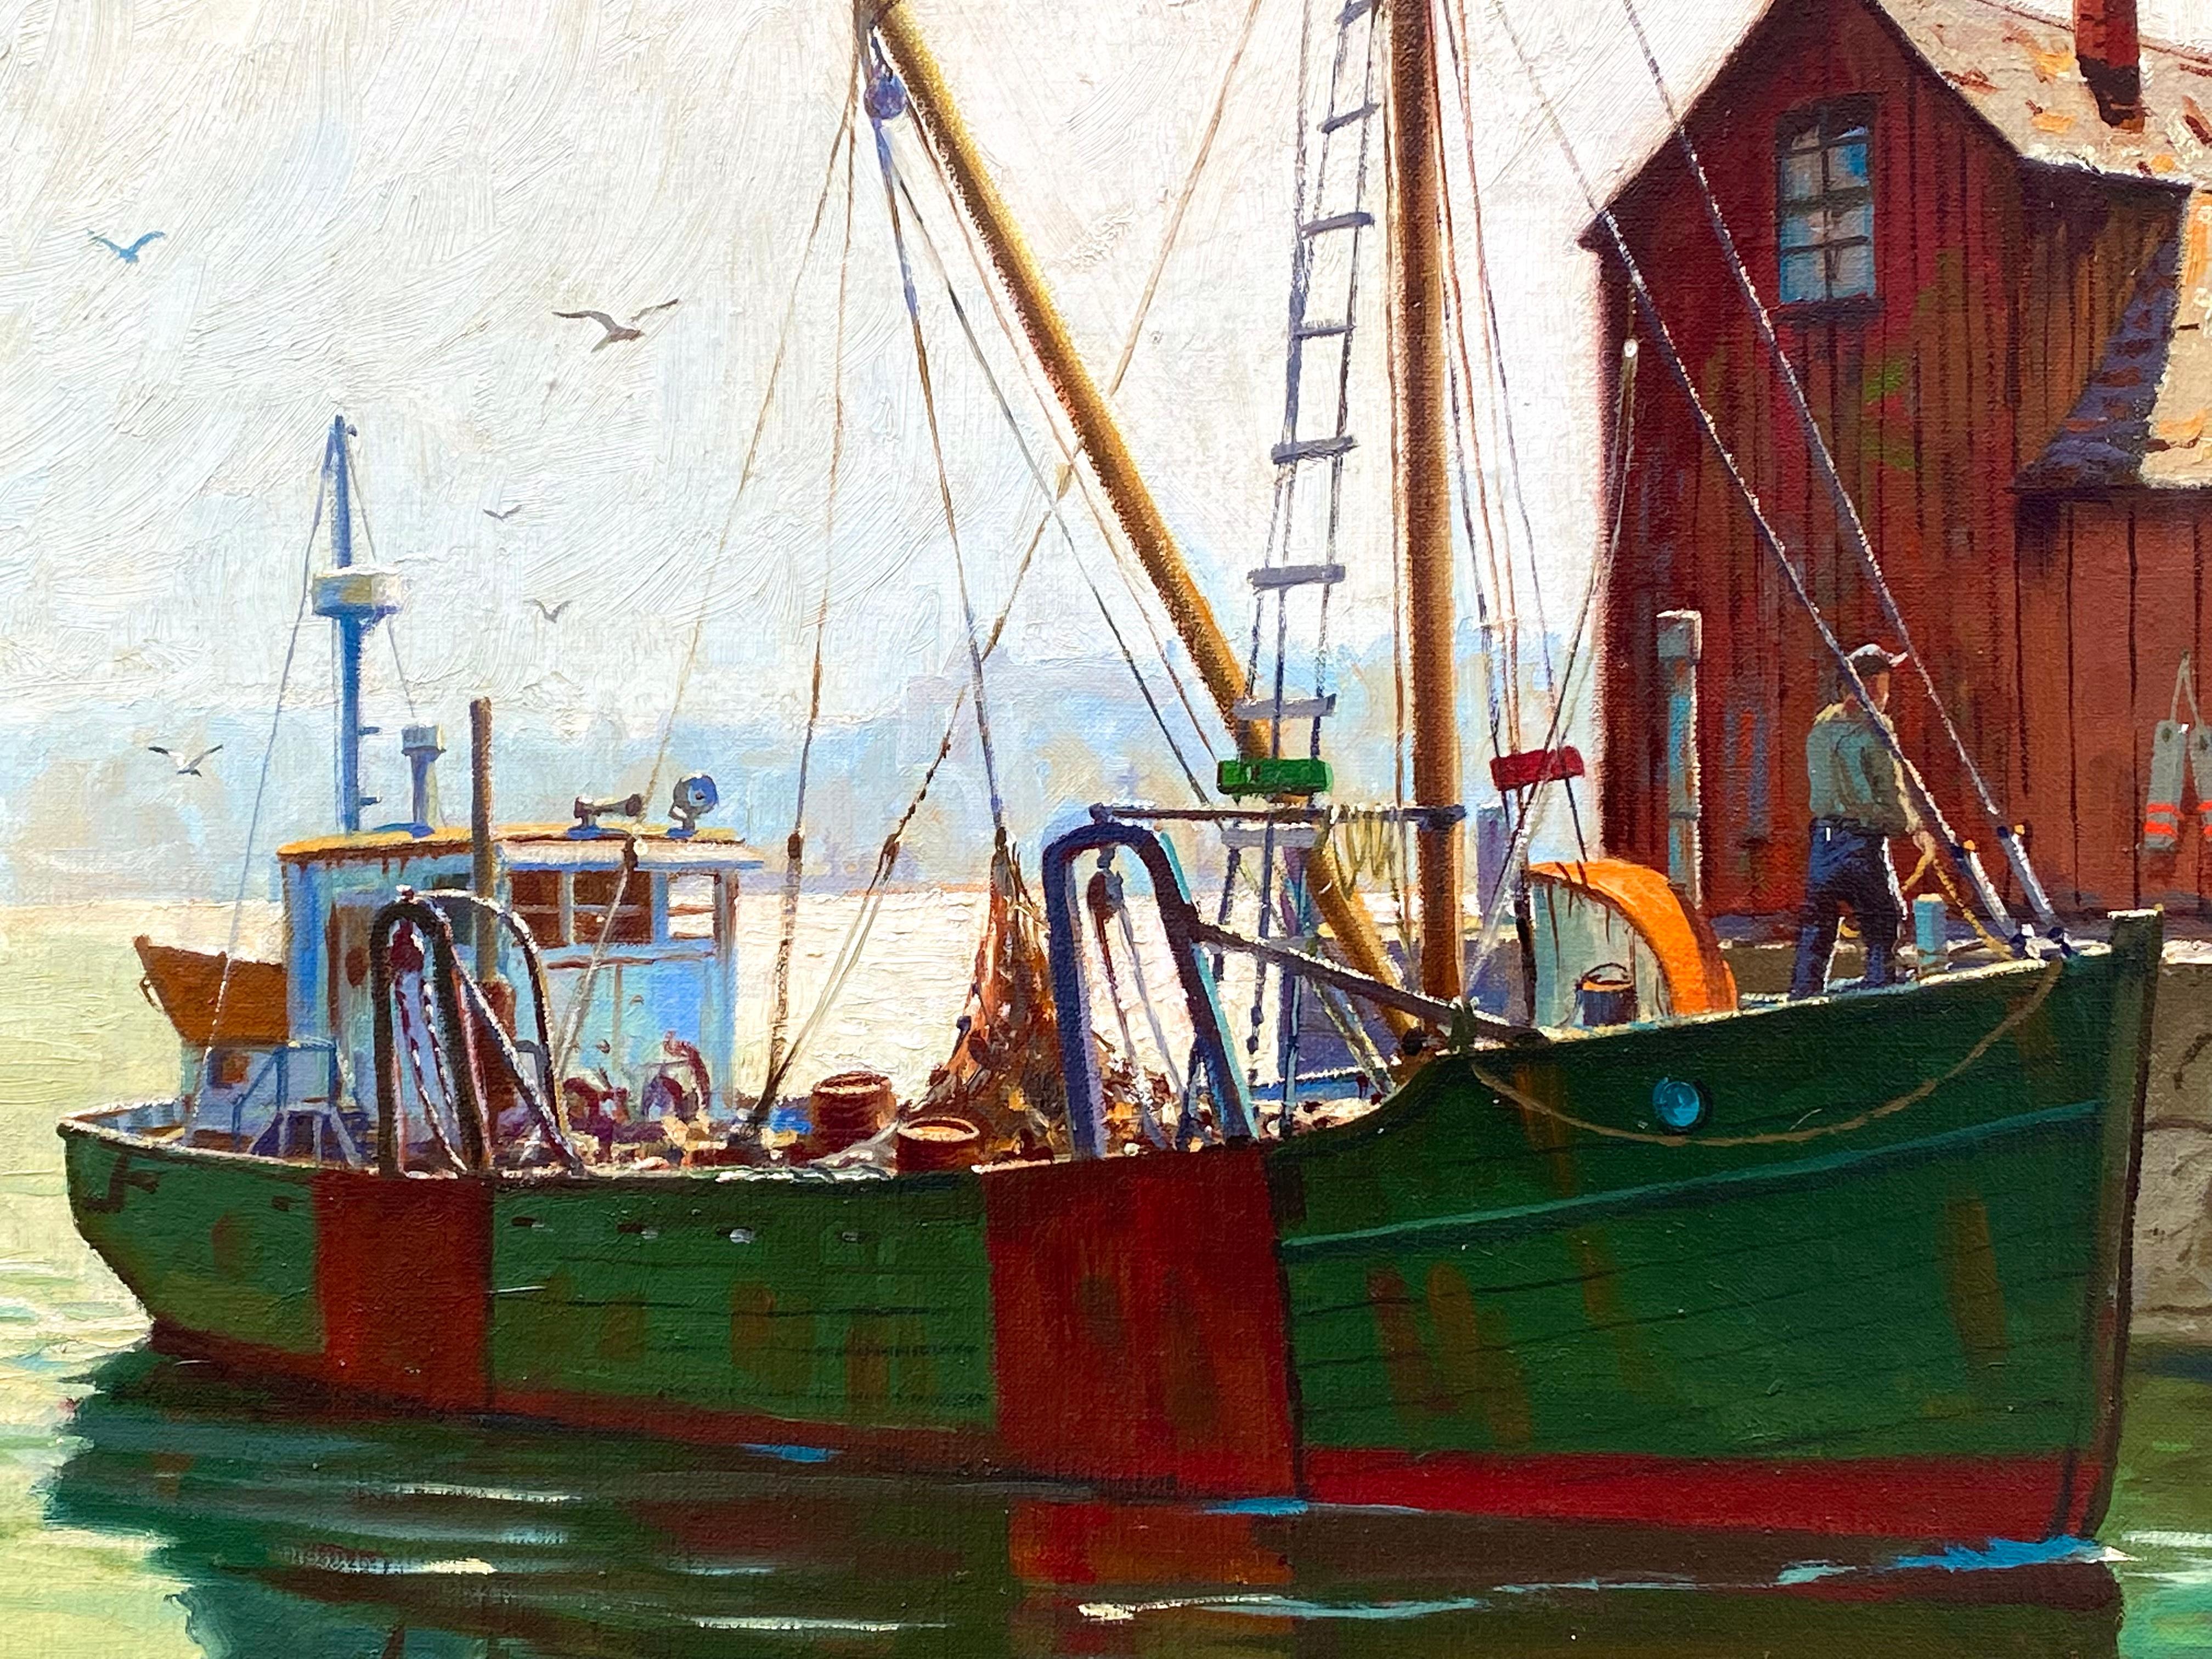 Original oil on canvas painting by the well known Sag Harbor marine artist Casper Hjalmar Amundsen.  Signed lower right. Copyrighted and dated verso 1976.  Condition is excellent. The subject of the painting is Rockport Harbor In Massachusetts with